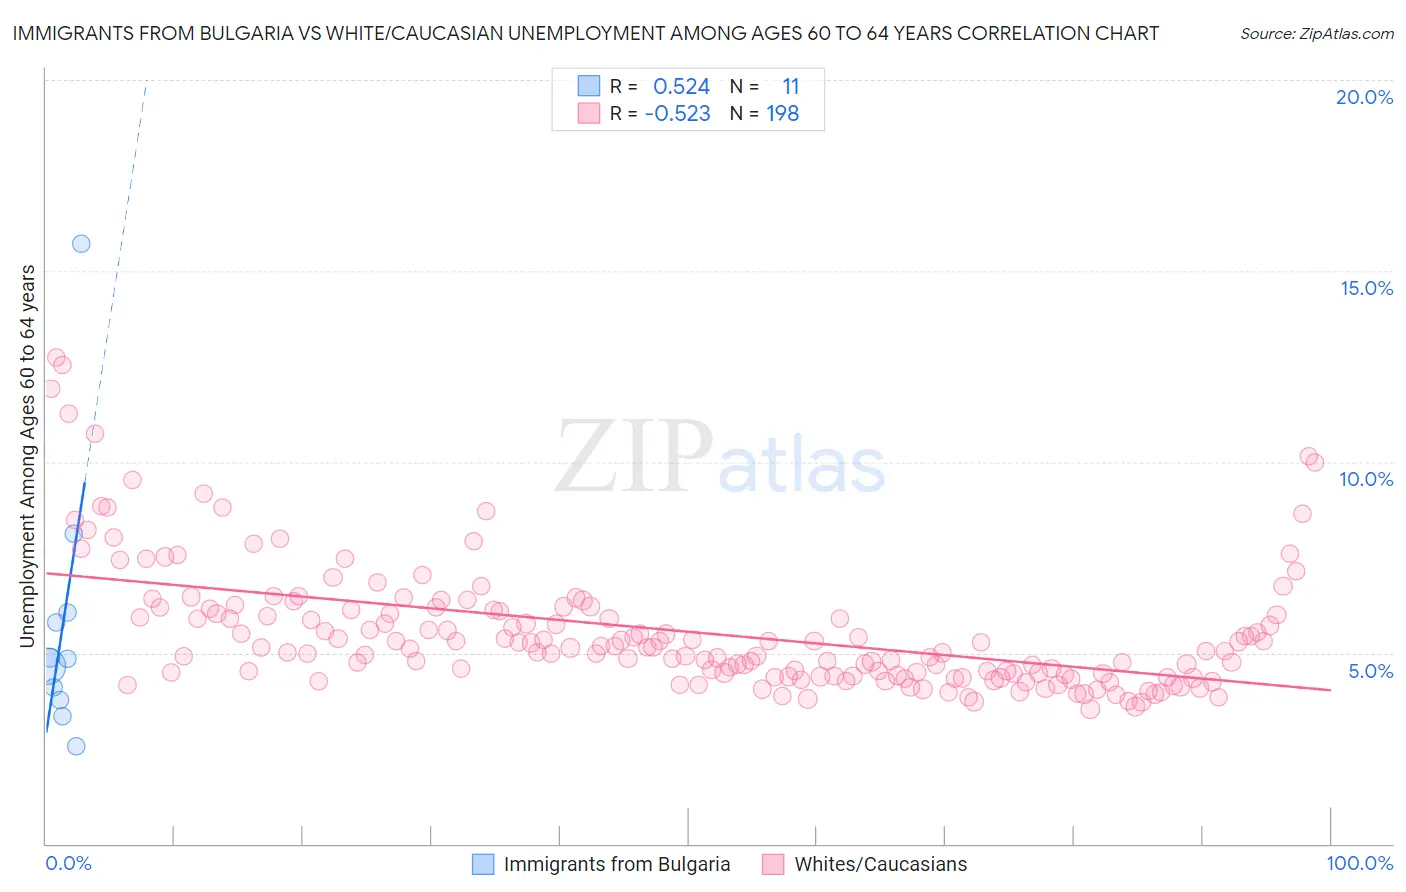 Immigrants from Bulgaria vs White/Caucasian Unemployment Among Ages 60 to 64 years